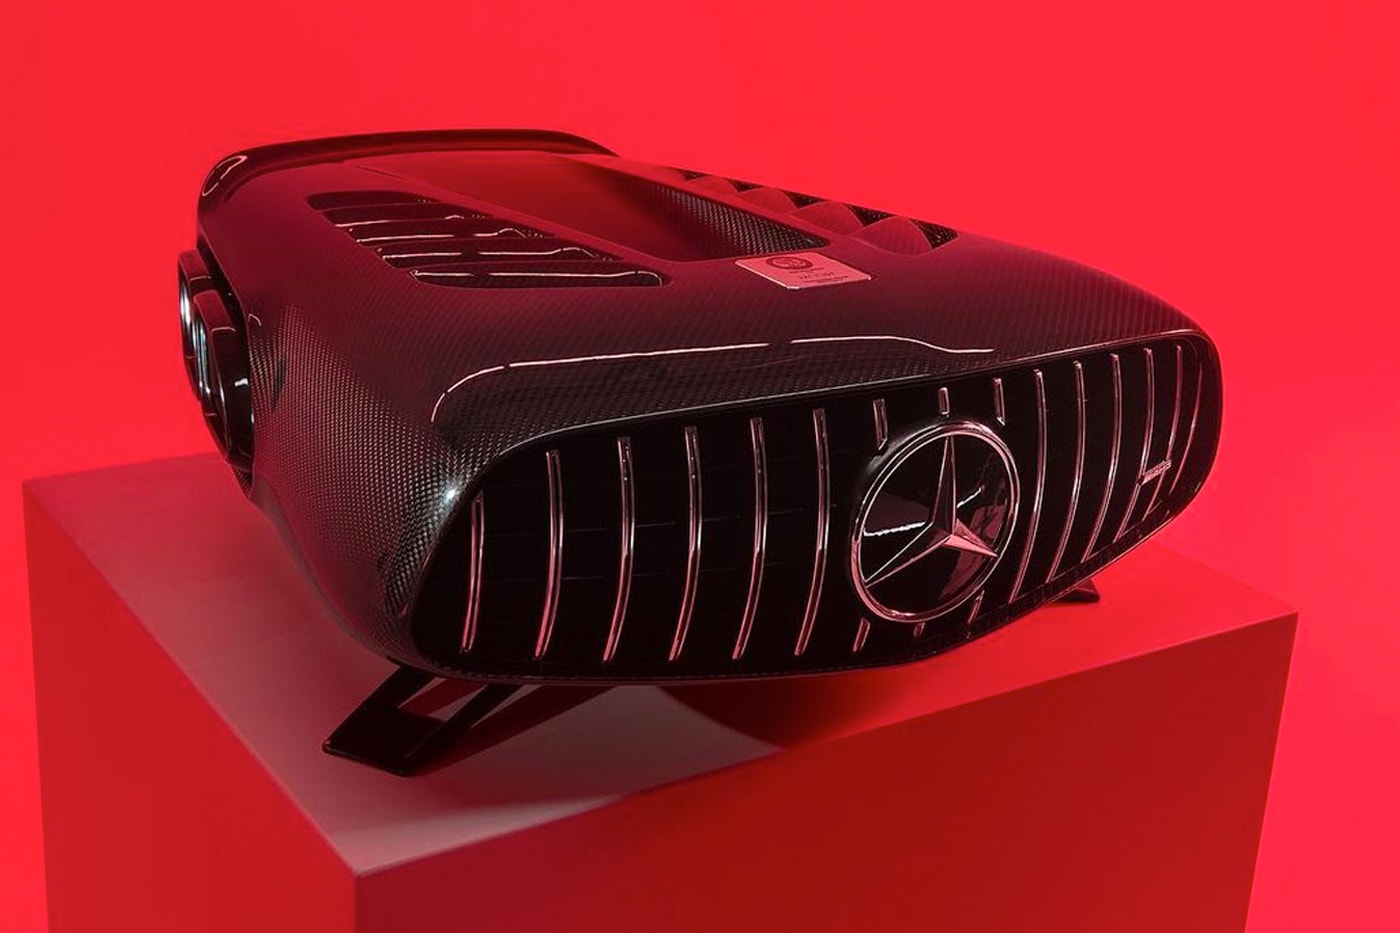 Mercedes-AMG GT Inspires iXOOST Latest Bespoke Speakers carbon fiber grille diffuser tailpipe black badge release info date